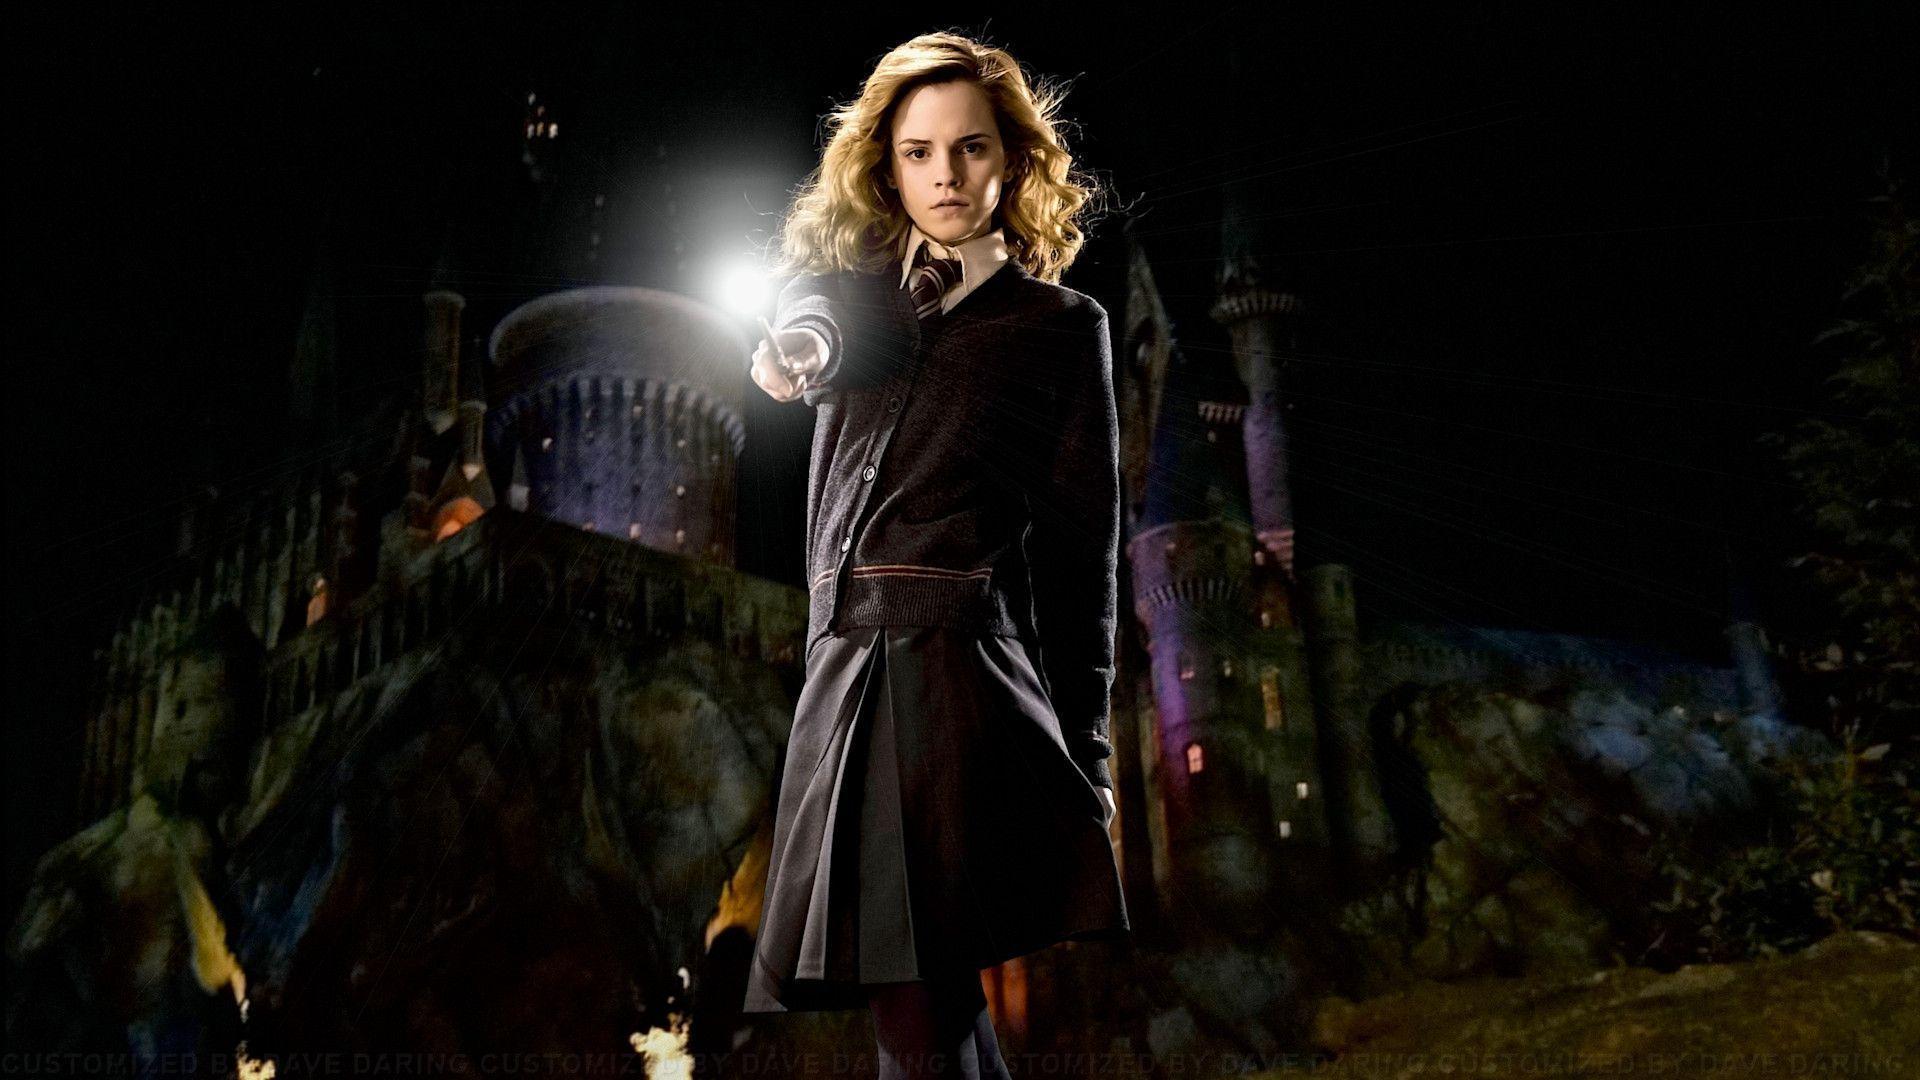 Free Download Hermione Granger Wallpapers 1920x1080 For Your Desktop